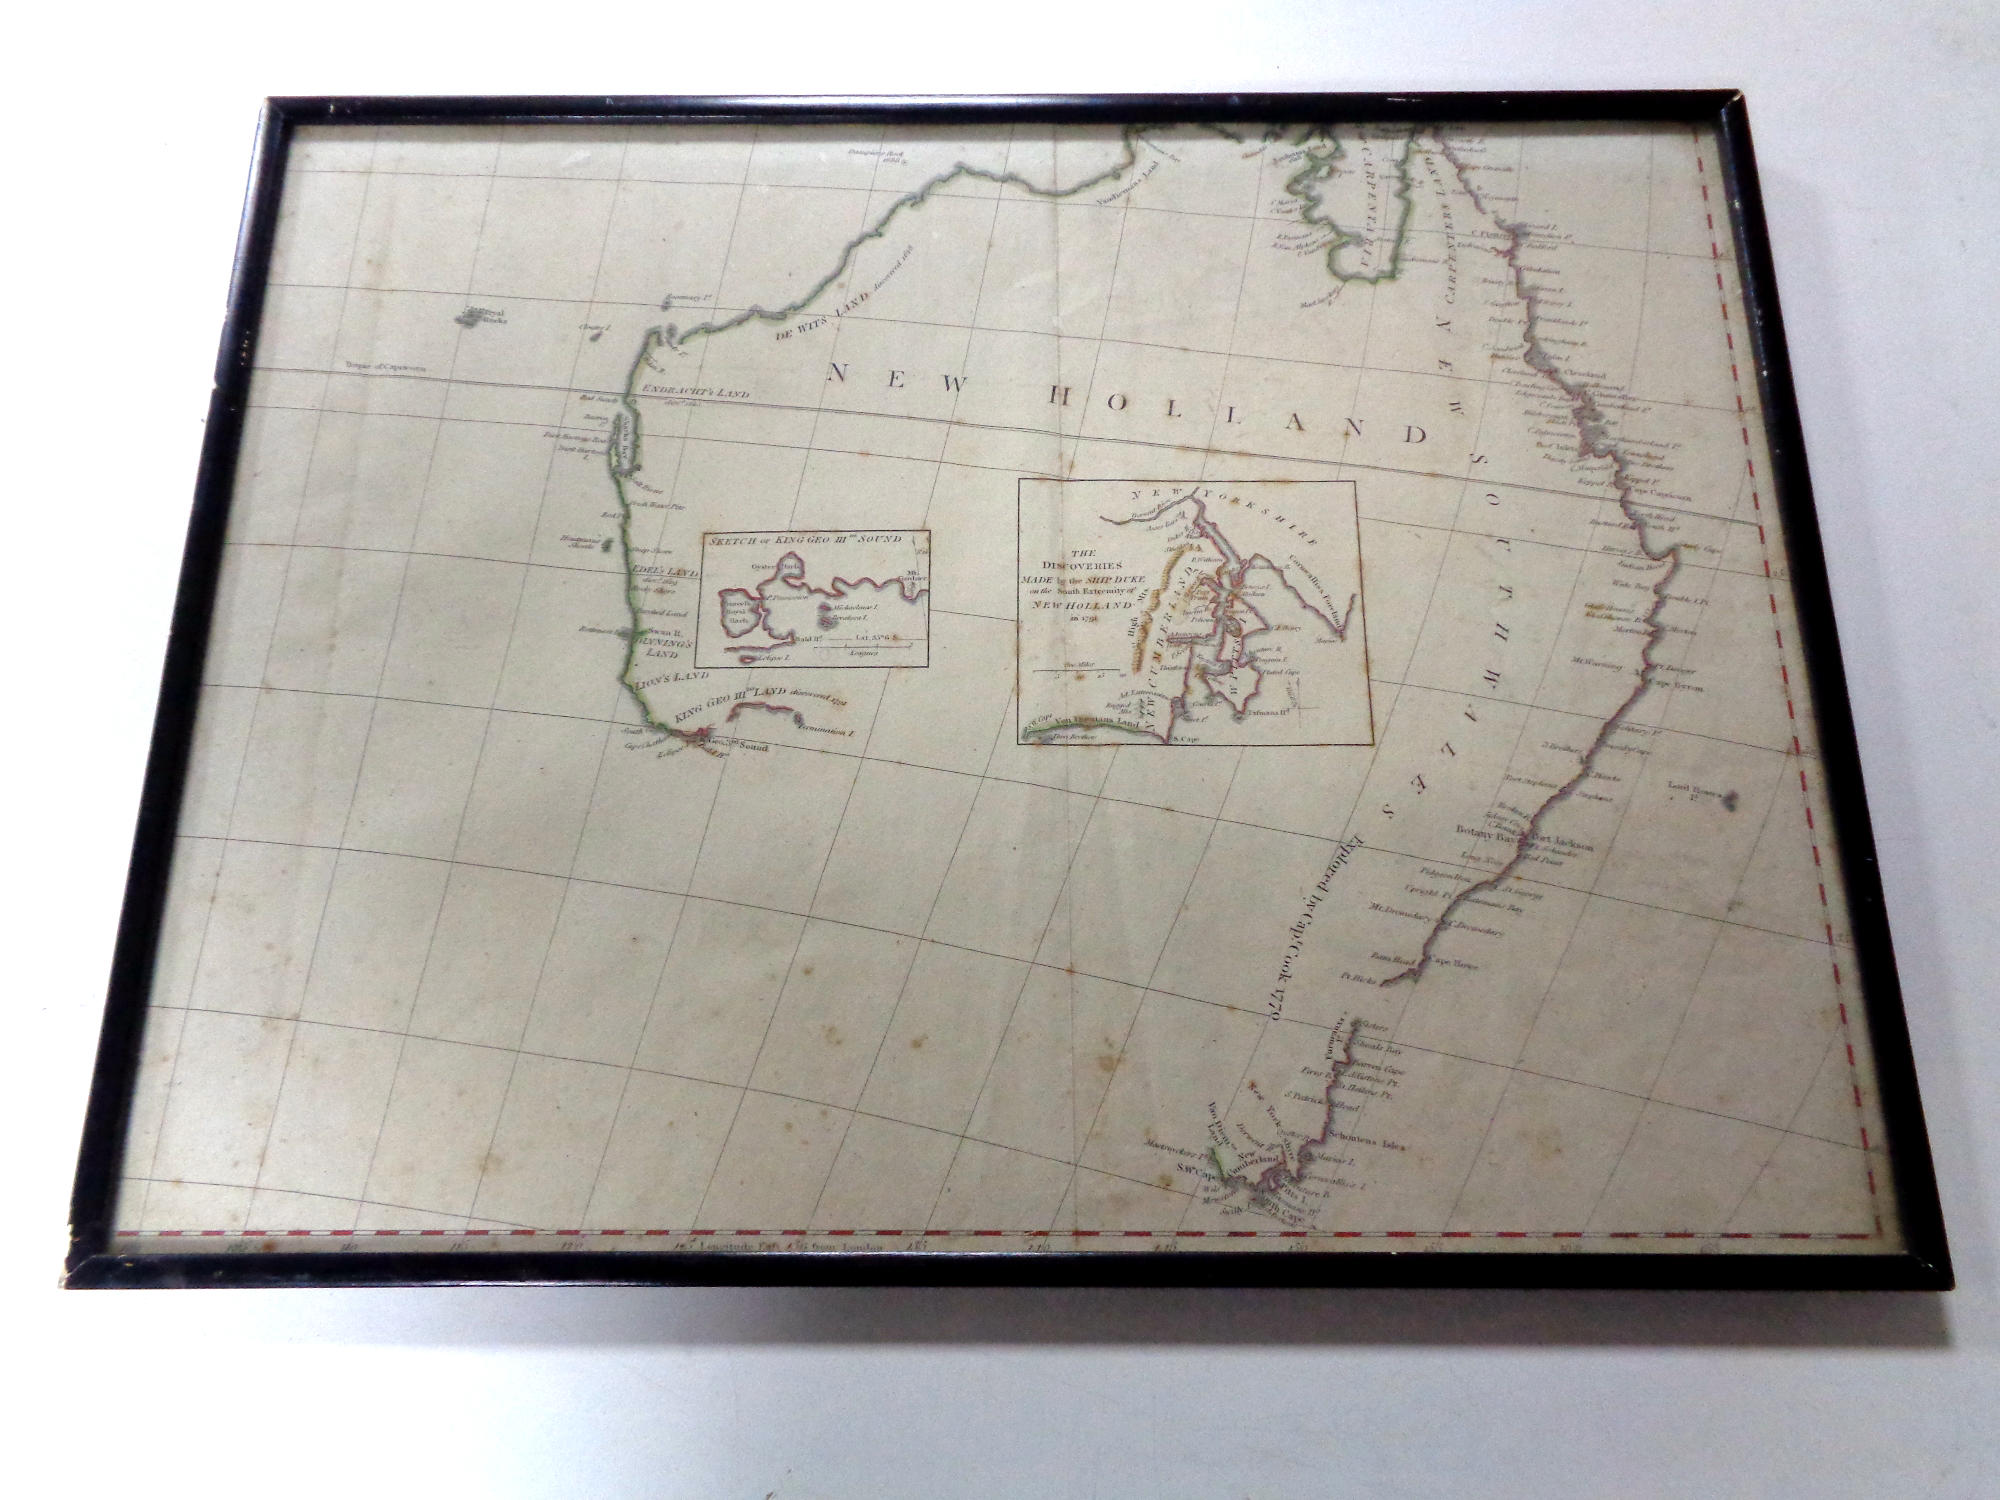 An antiquarian map of New Holland in 1791, made from the discoveries by the ship Duke,